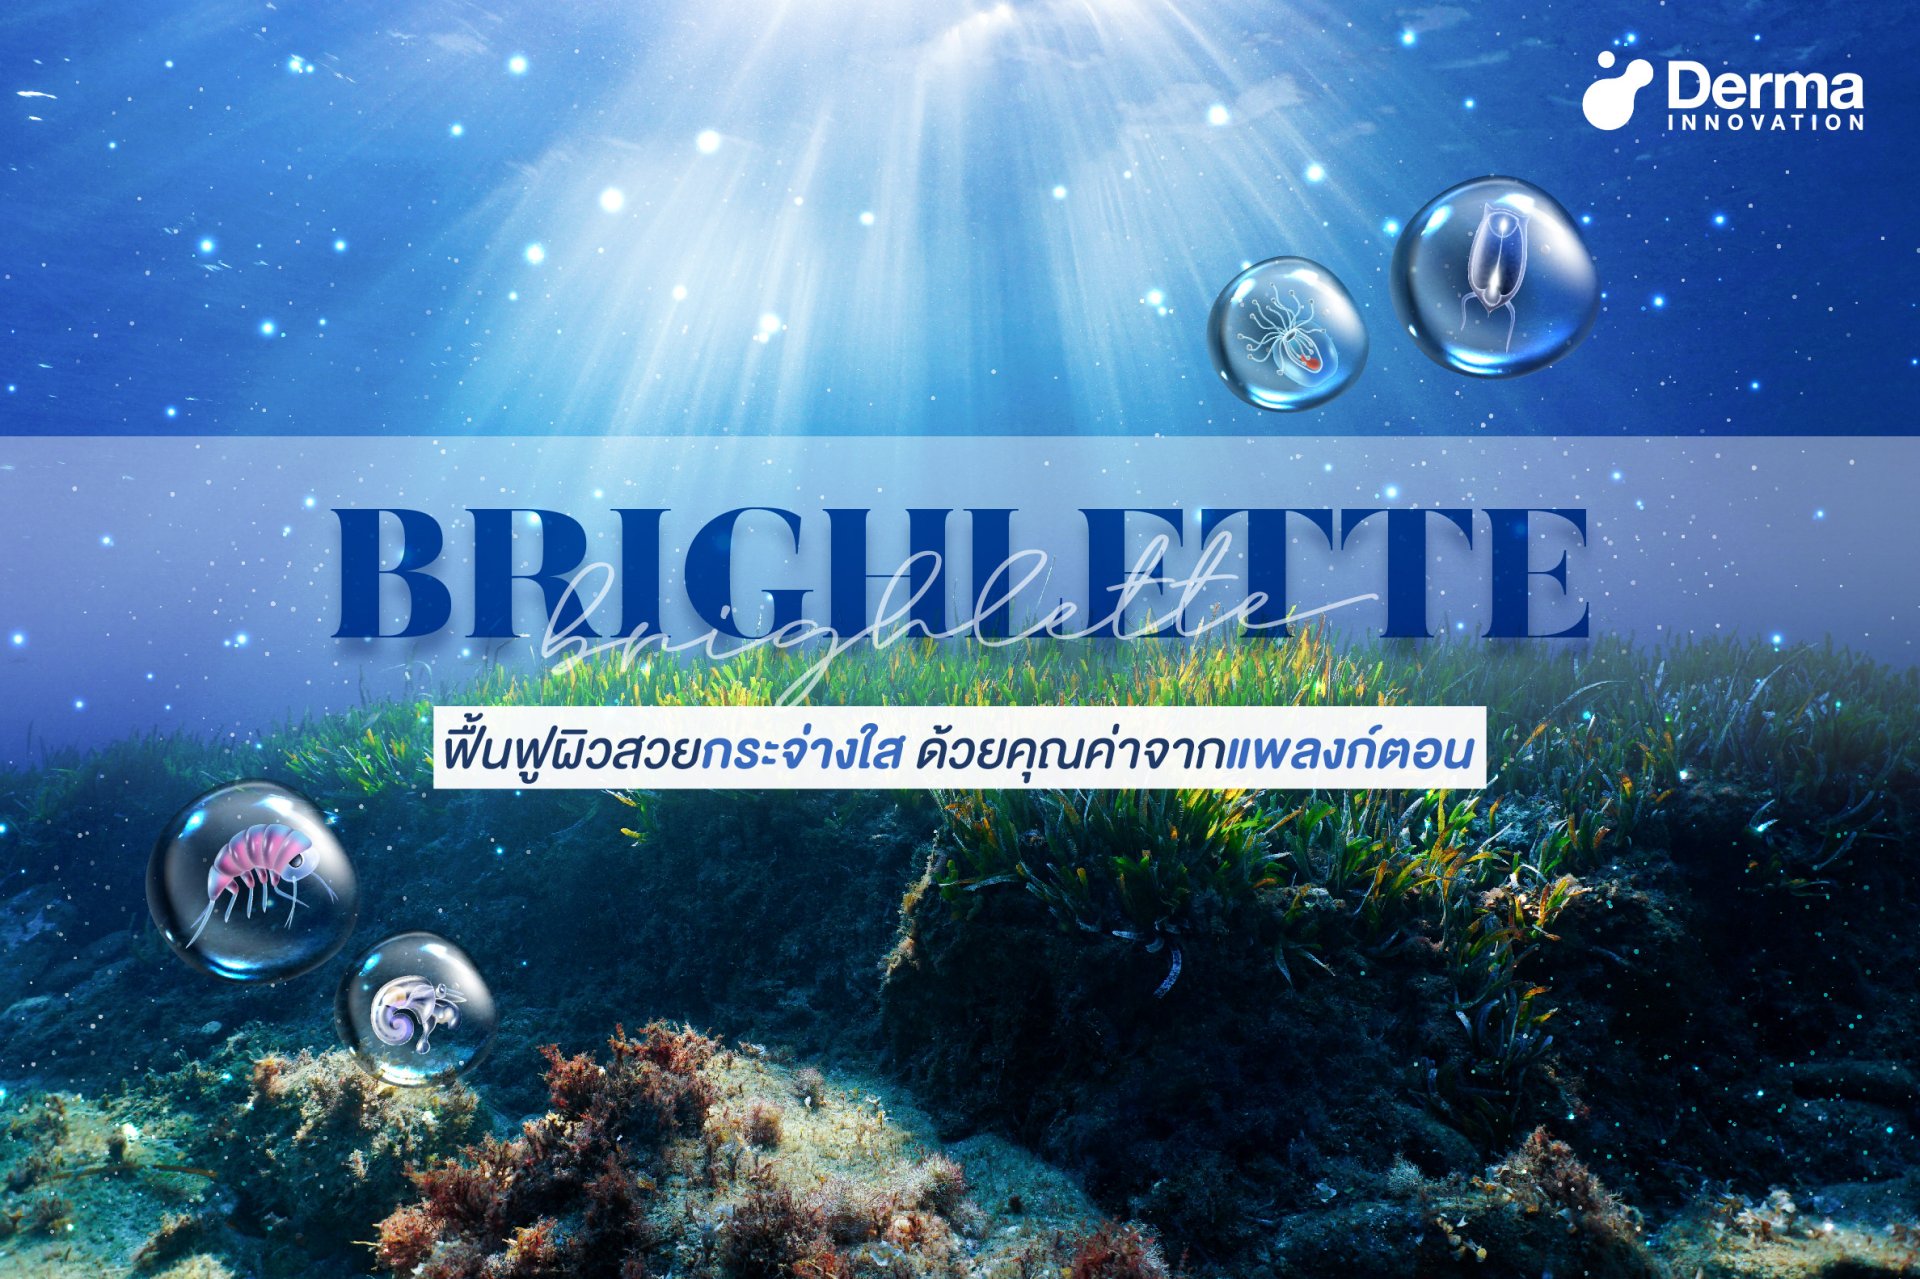 BRIGHLETTE restores radiant skin With the value of plankton